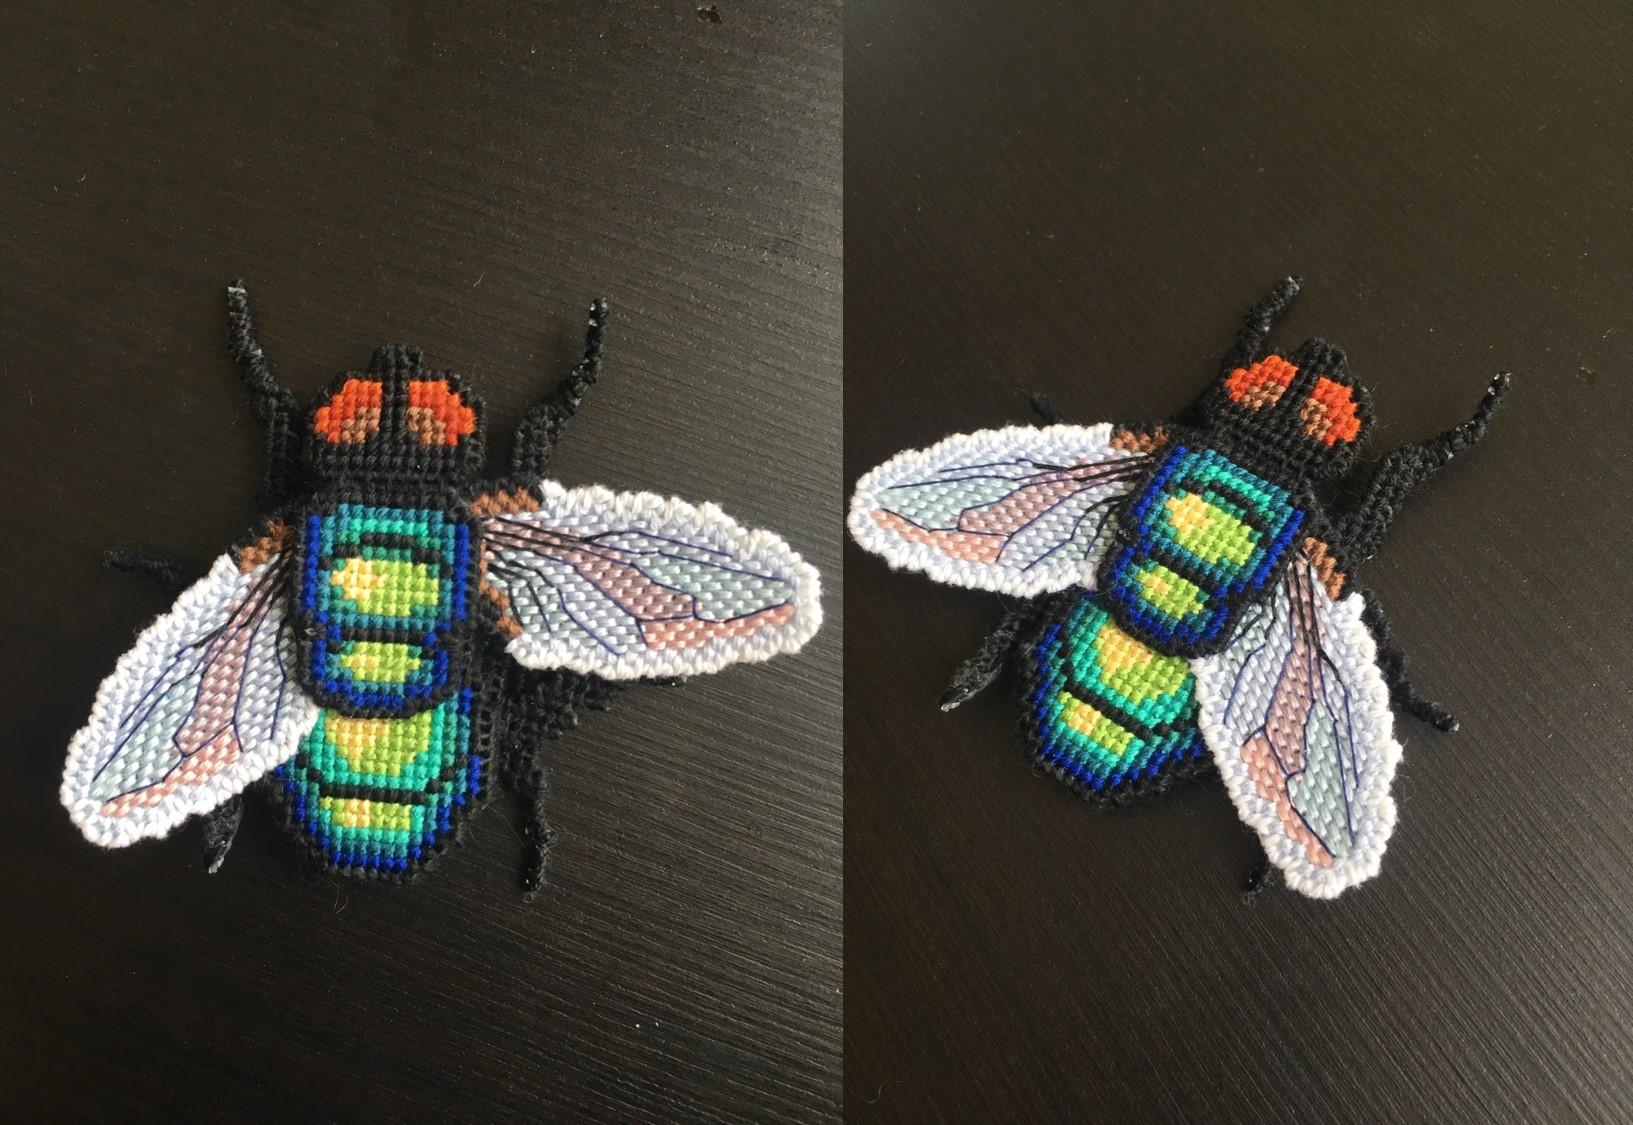 22 Realistic fly made of plastic canvas cross stitch pattern by Smasterilli